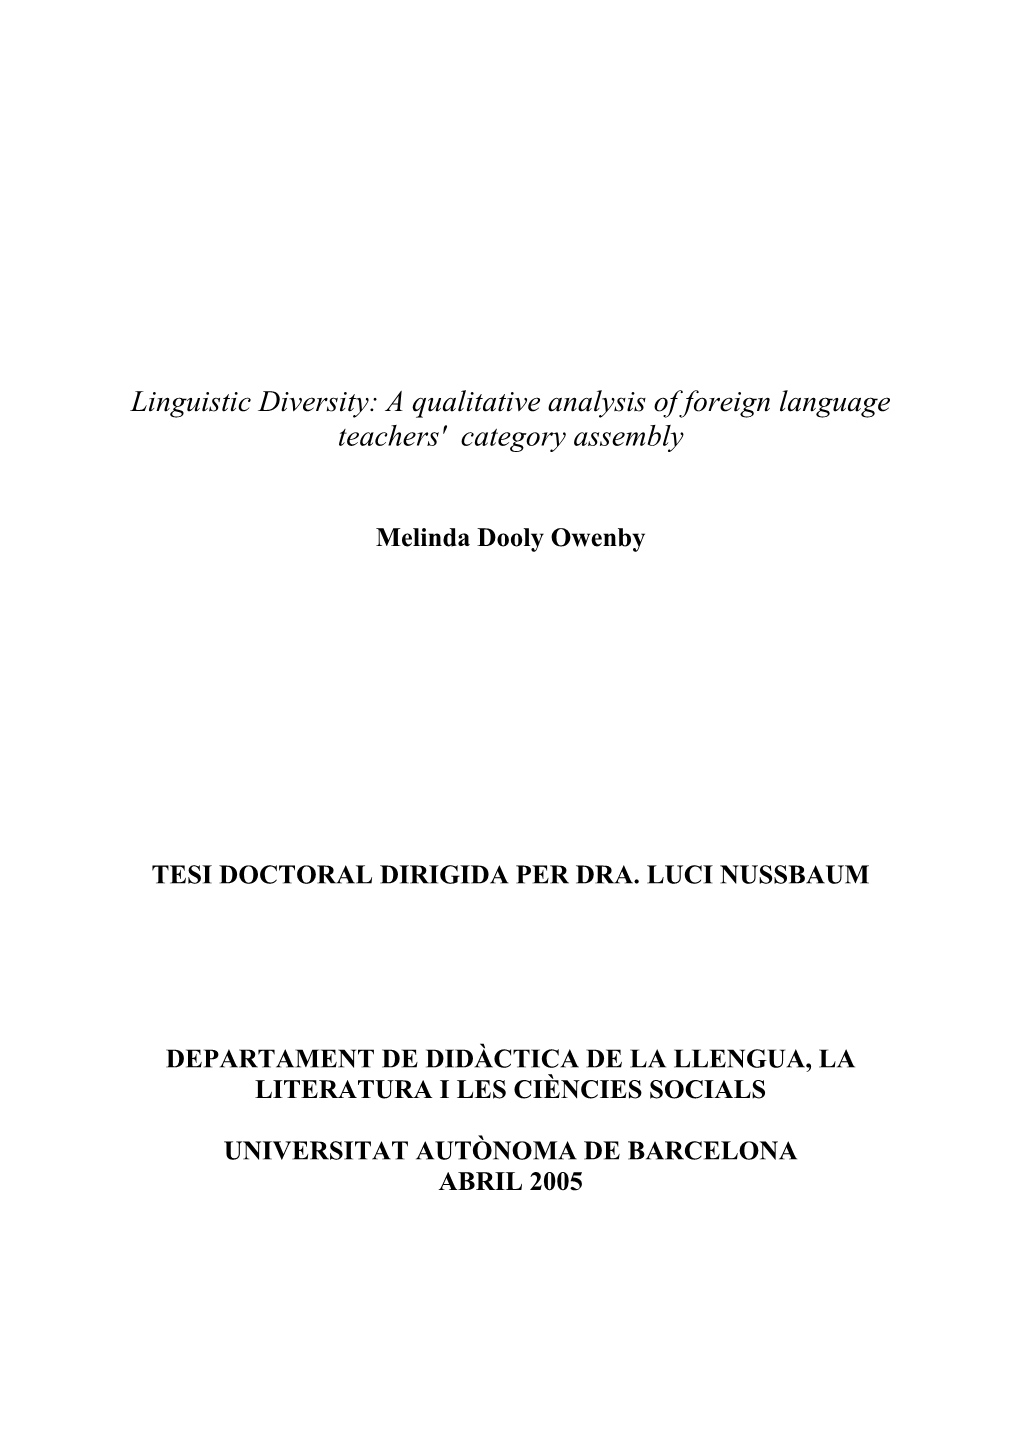 Linguistic Diversity: a Qualitative Analysis of Foreign Language Teachers' Category Assembly